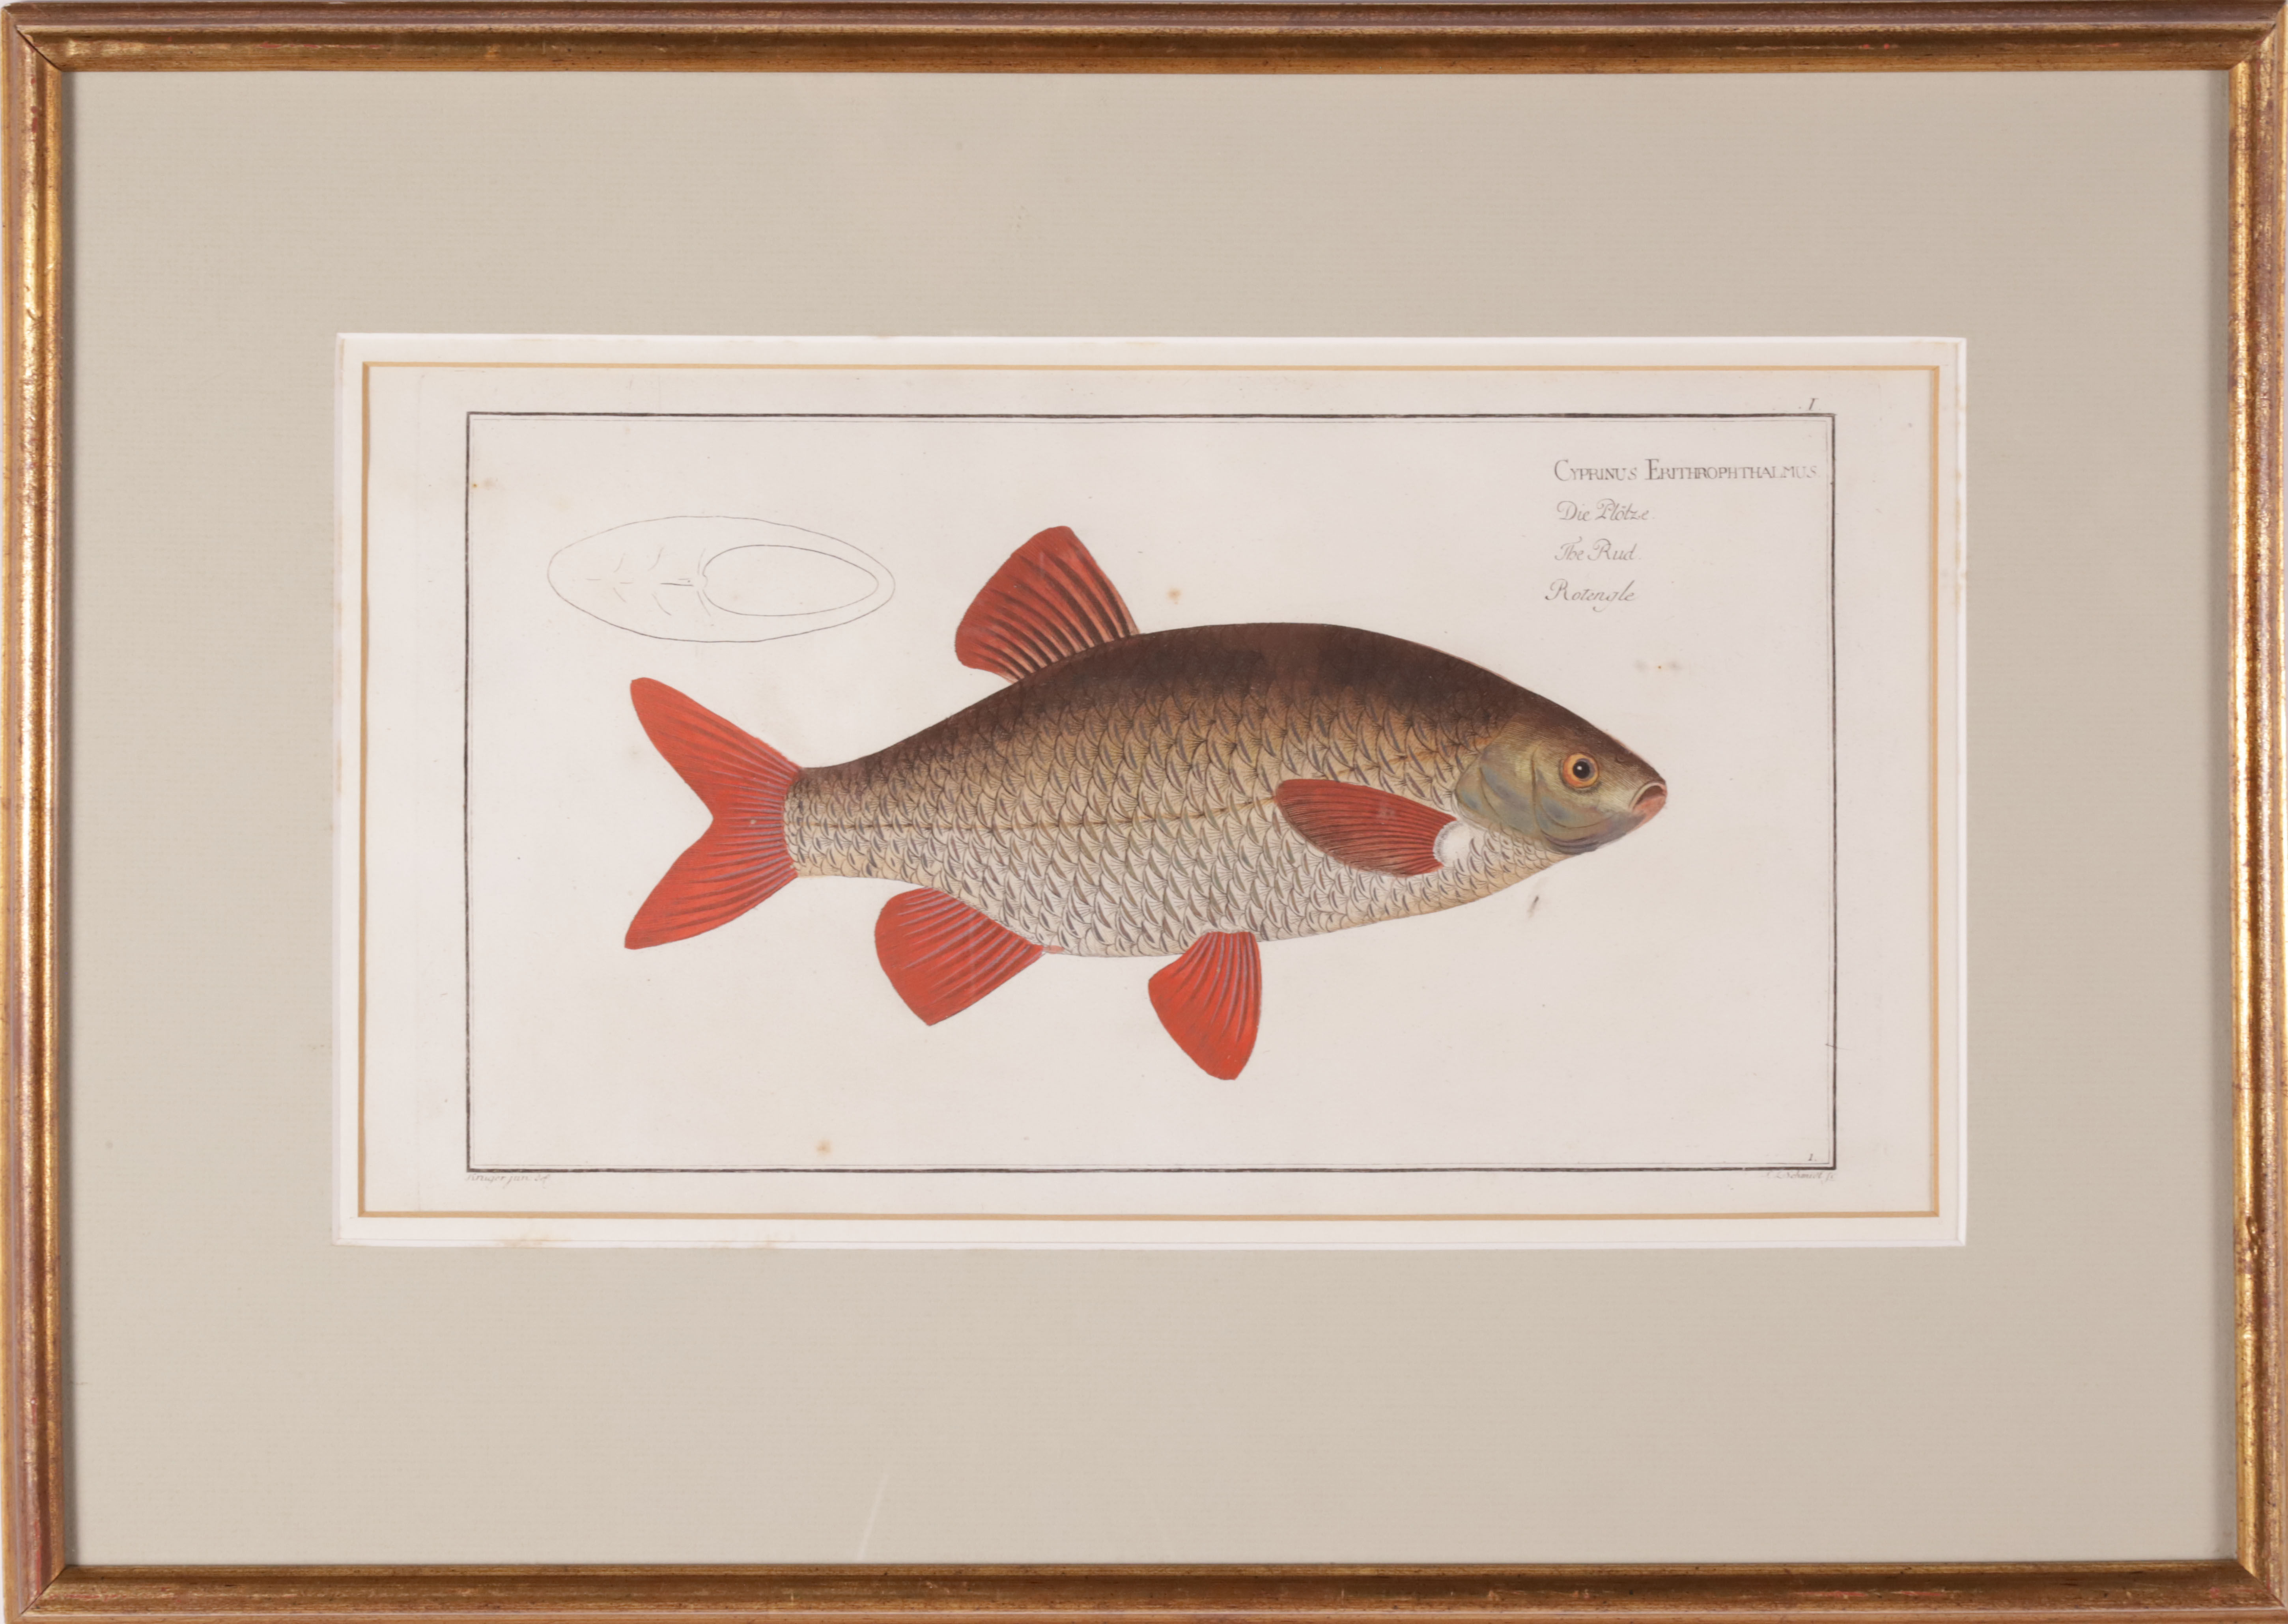 Group of Four Fish Lithographs by Kruger Jan. Del, 19th Century